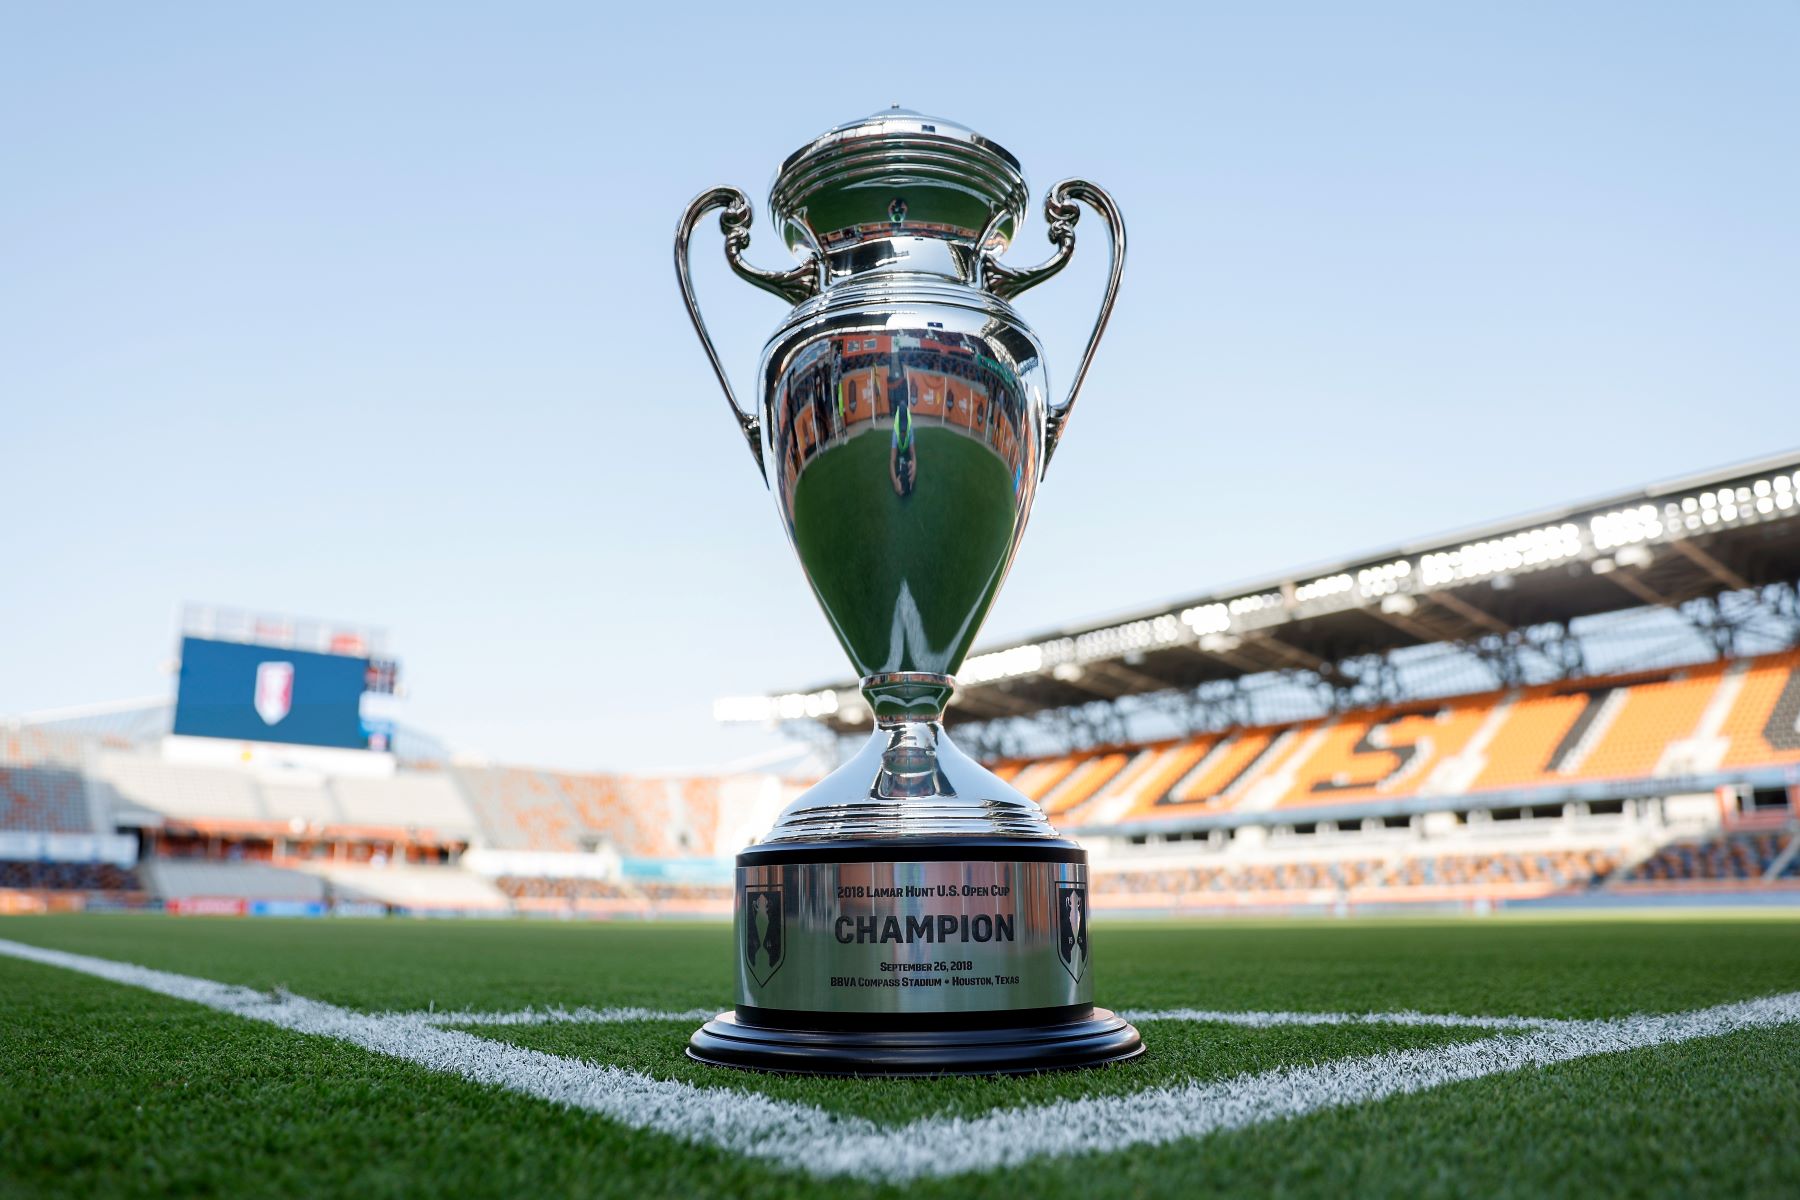 Plans approved for new-look U.S. Open Cup